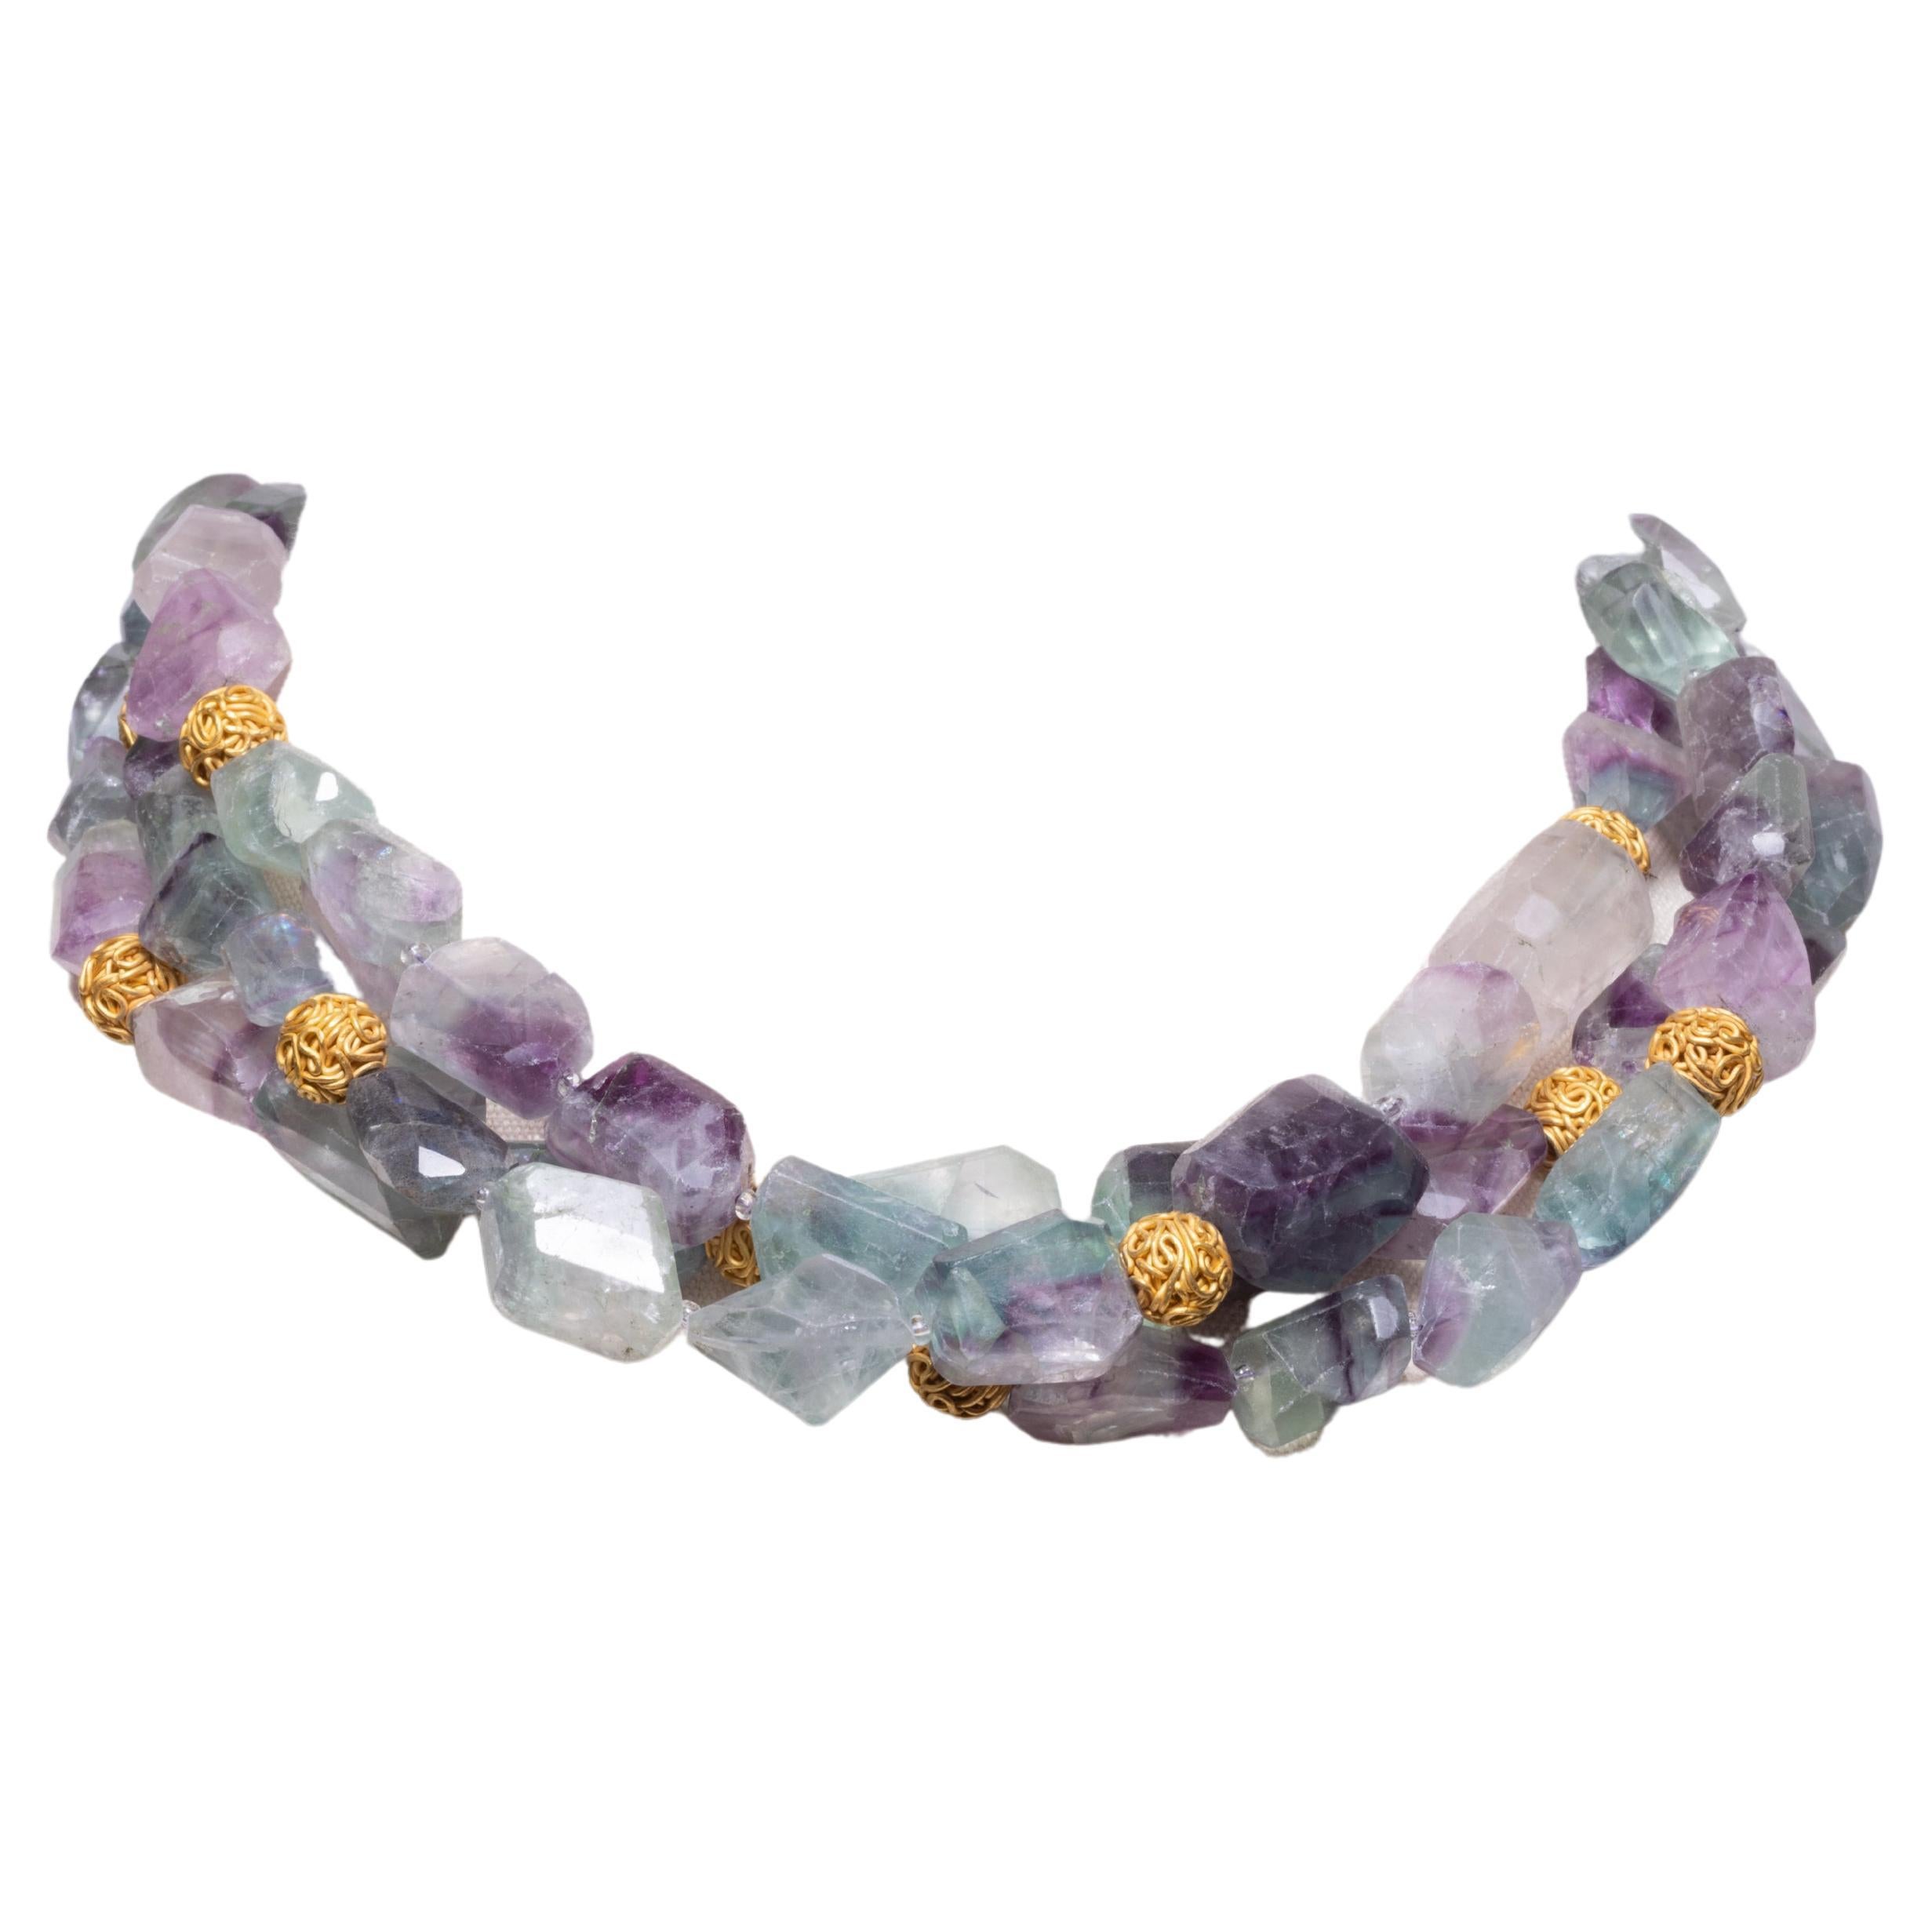 22K Gold and Tumbled Fluorite Multi-Strand Necklace by Deborah Lockhart Phillips For Sale